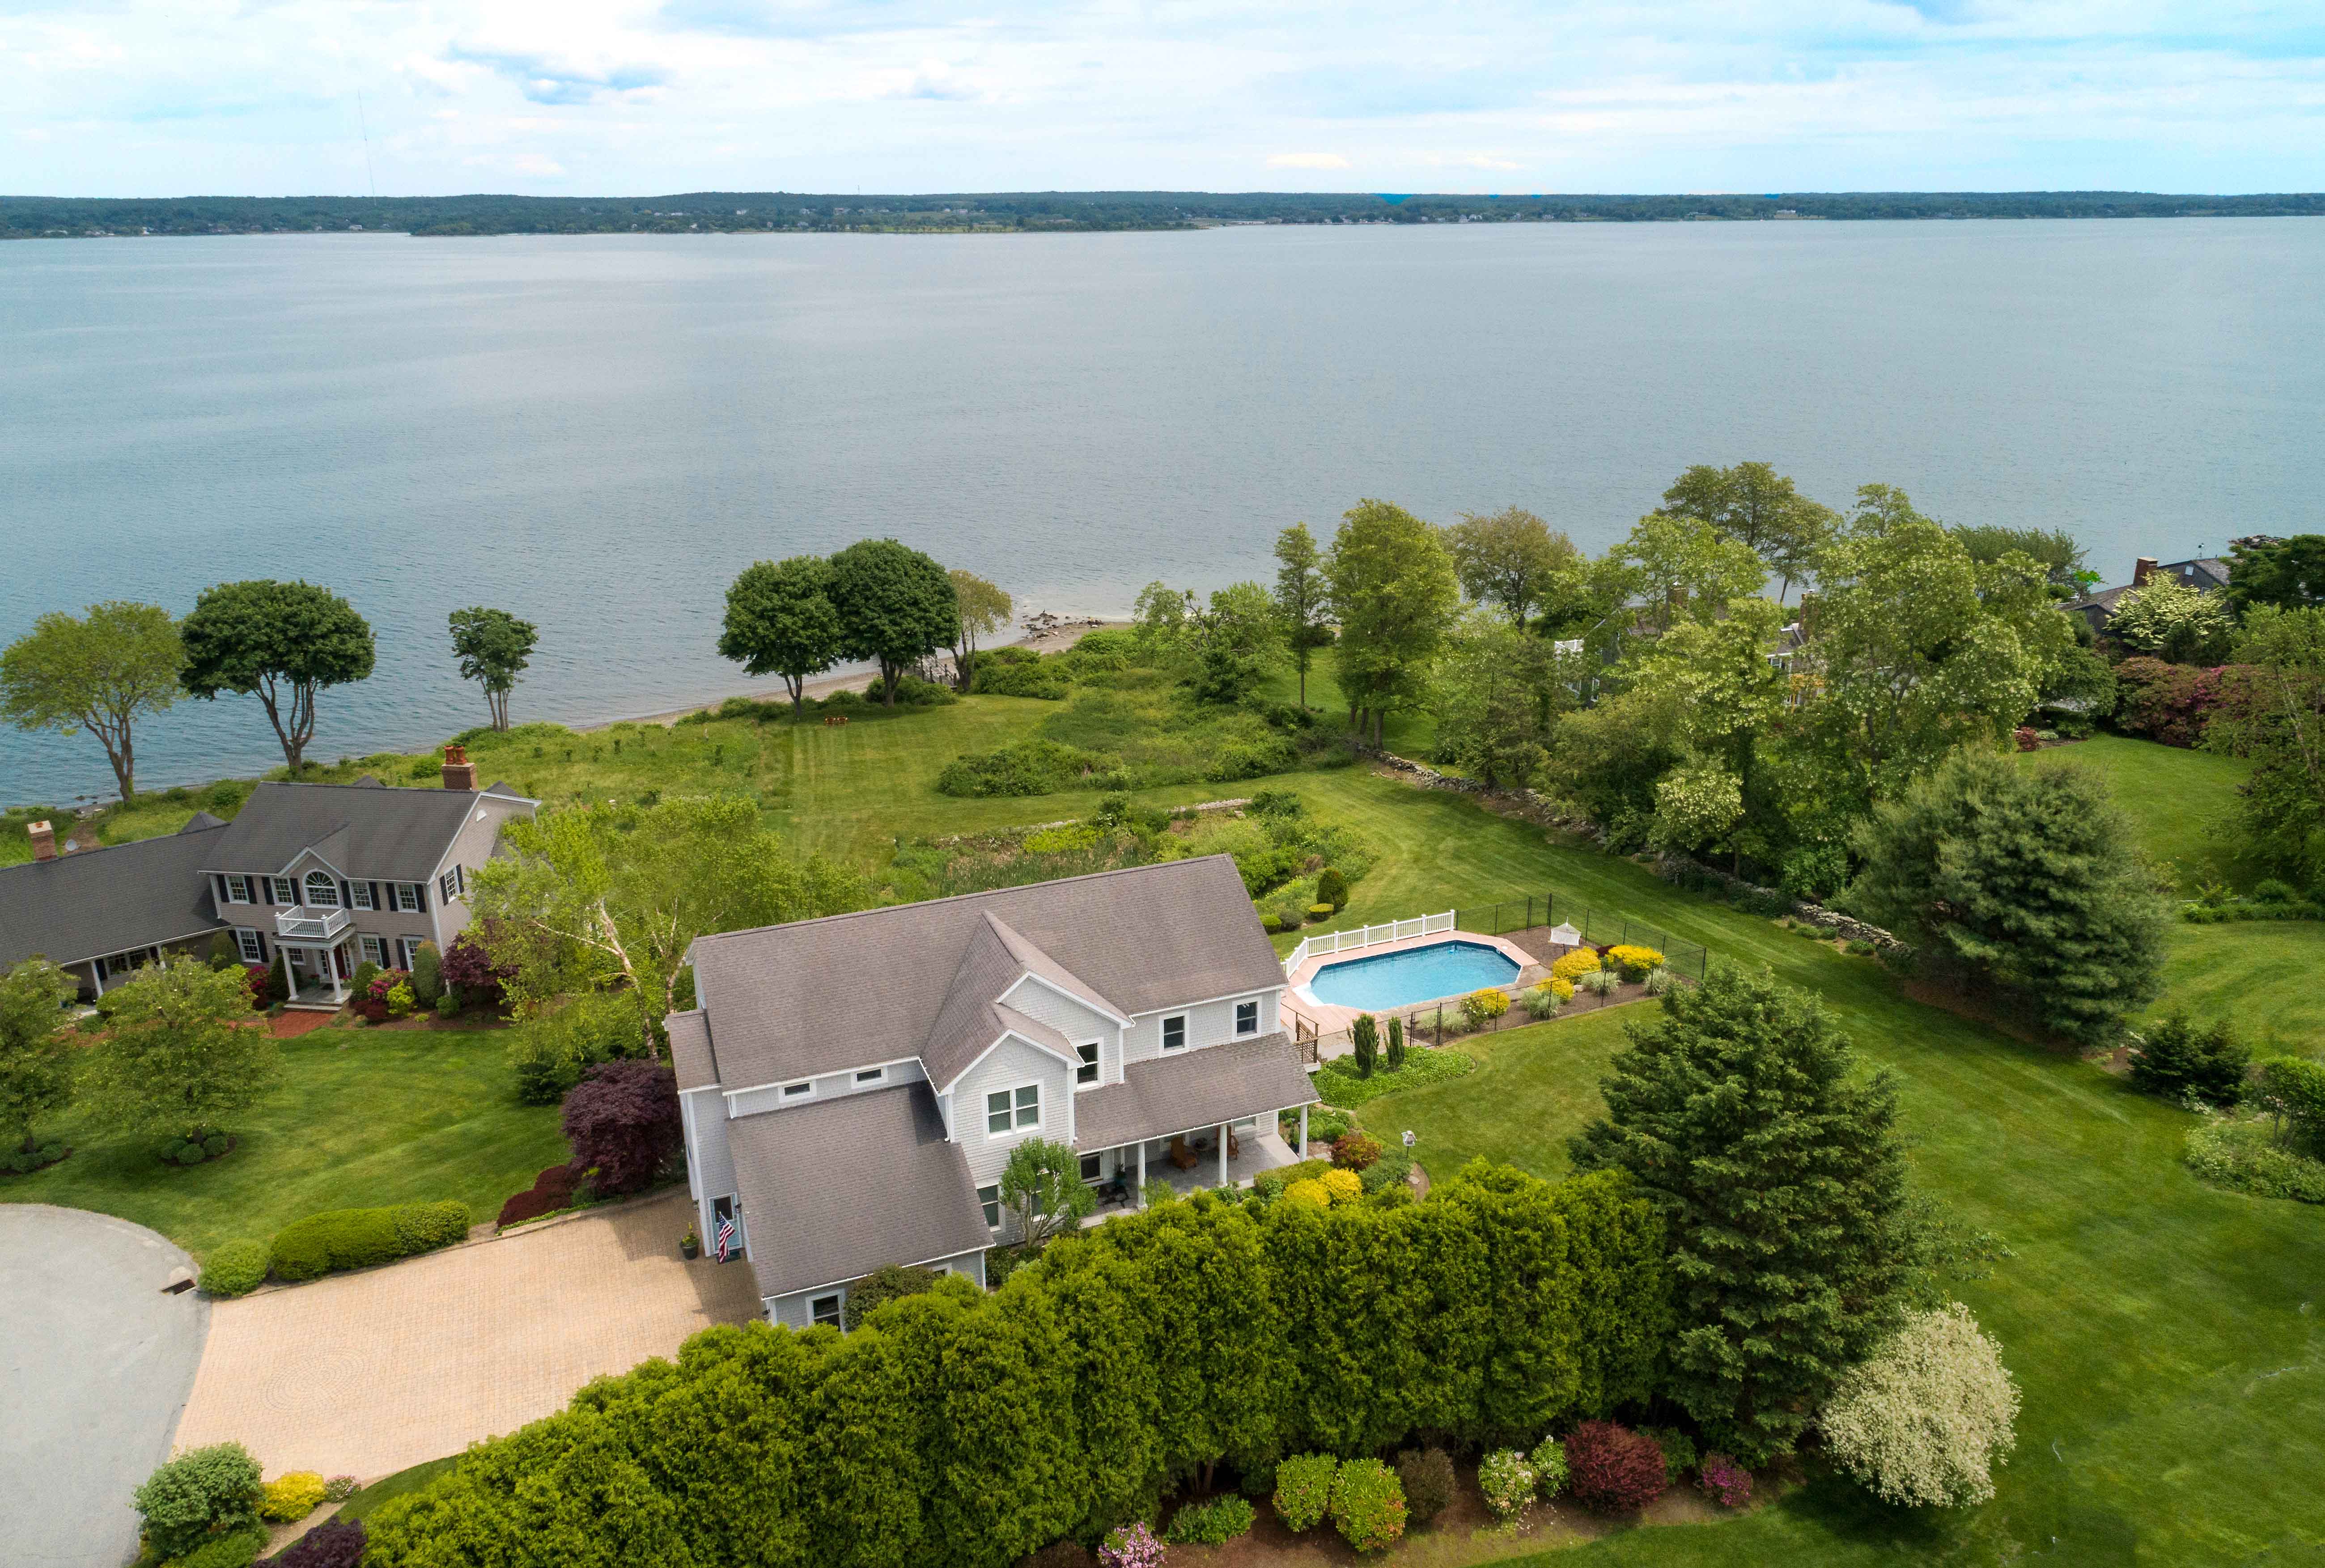 WATERFRONT COLONIAL SELLS FOR $1.755M, MARKING 2ND HIGHEST SALE IN PORTSMOUTH YEAR-TO-DATE*